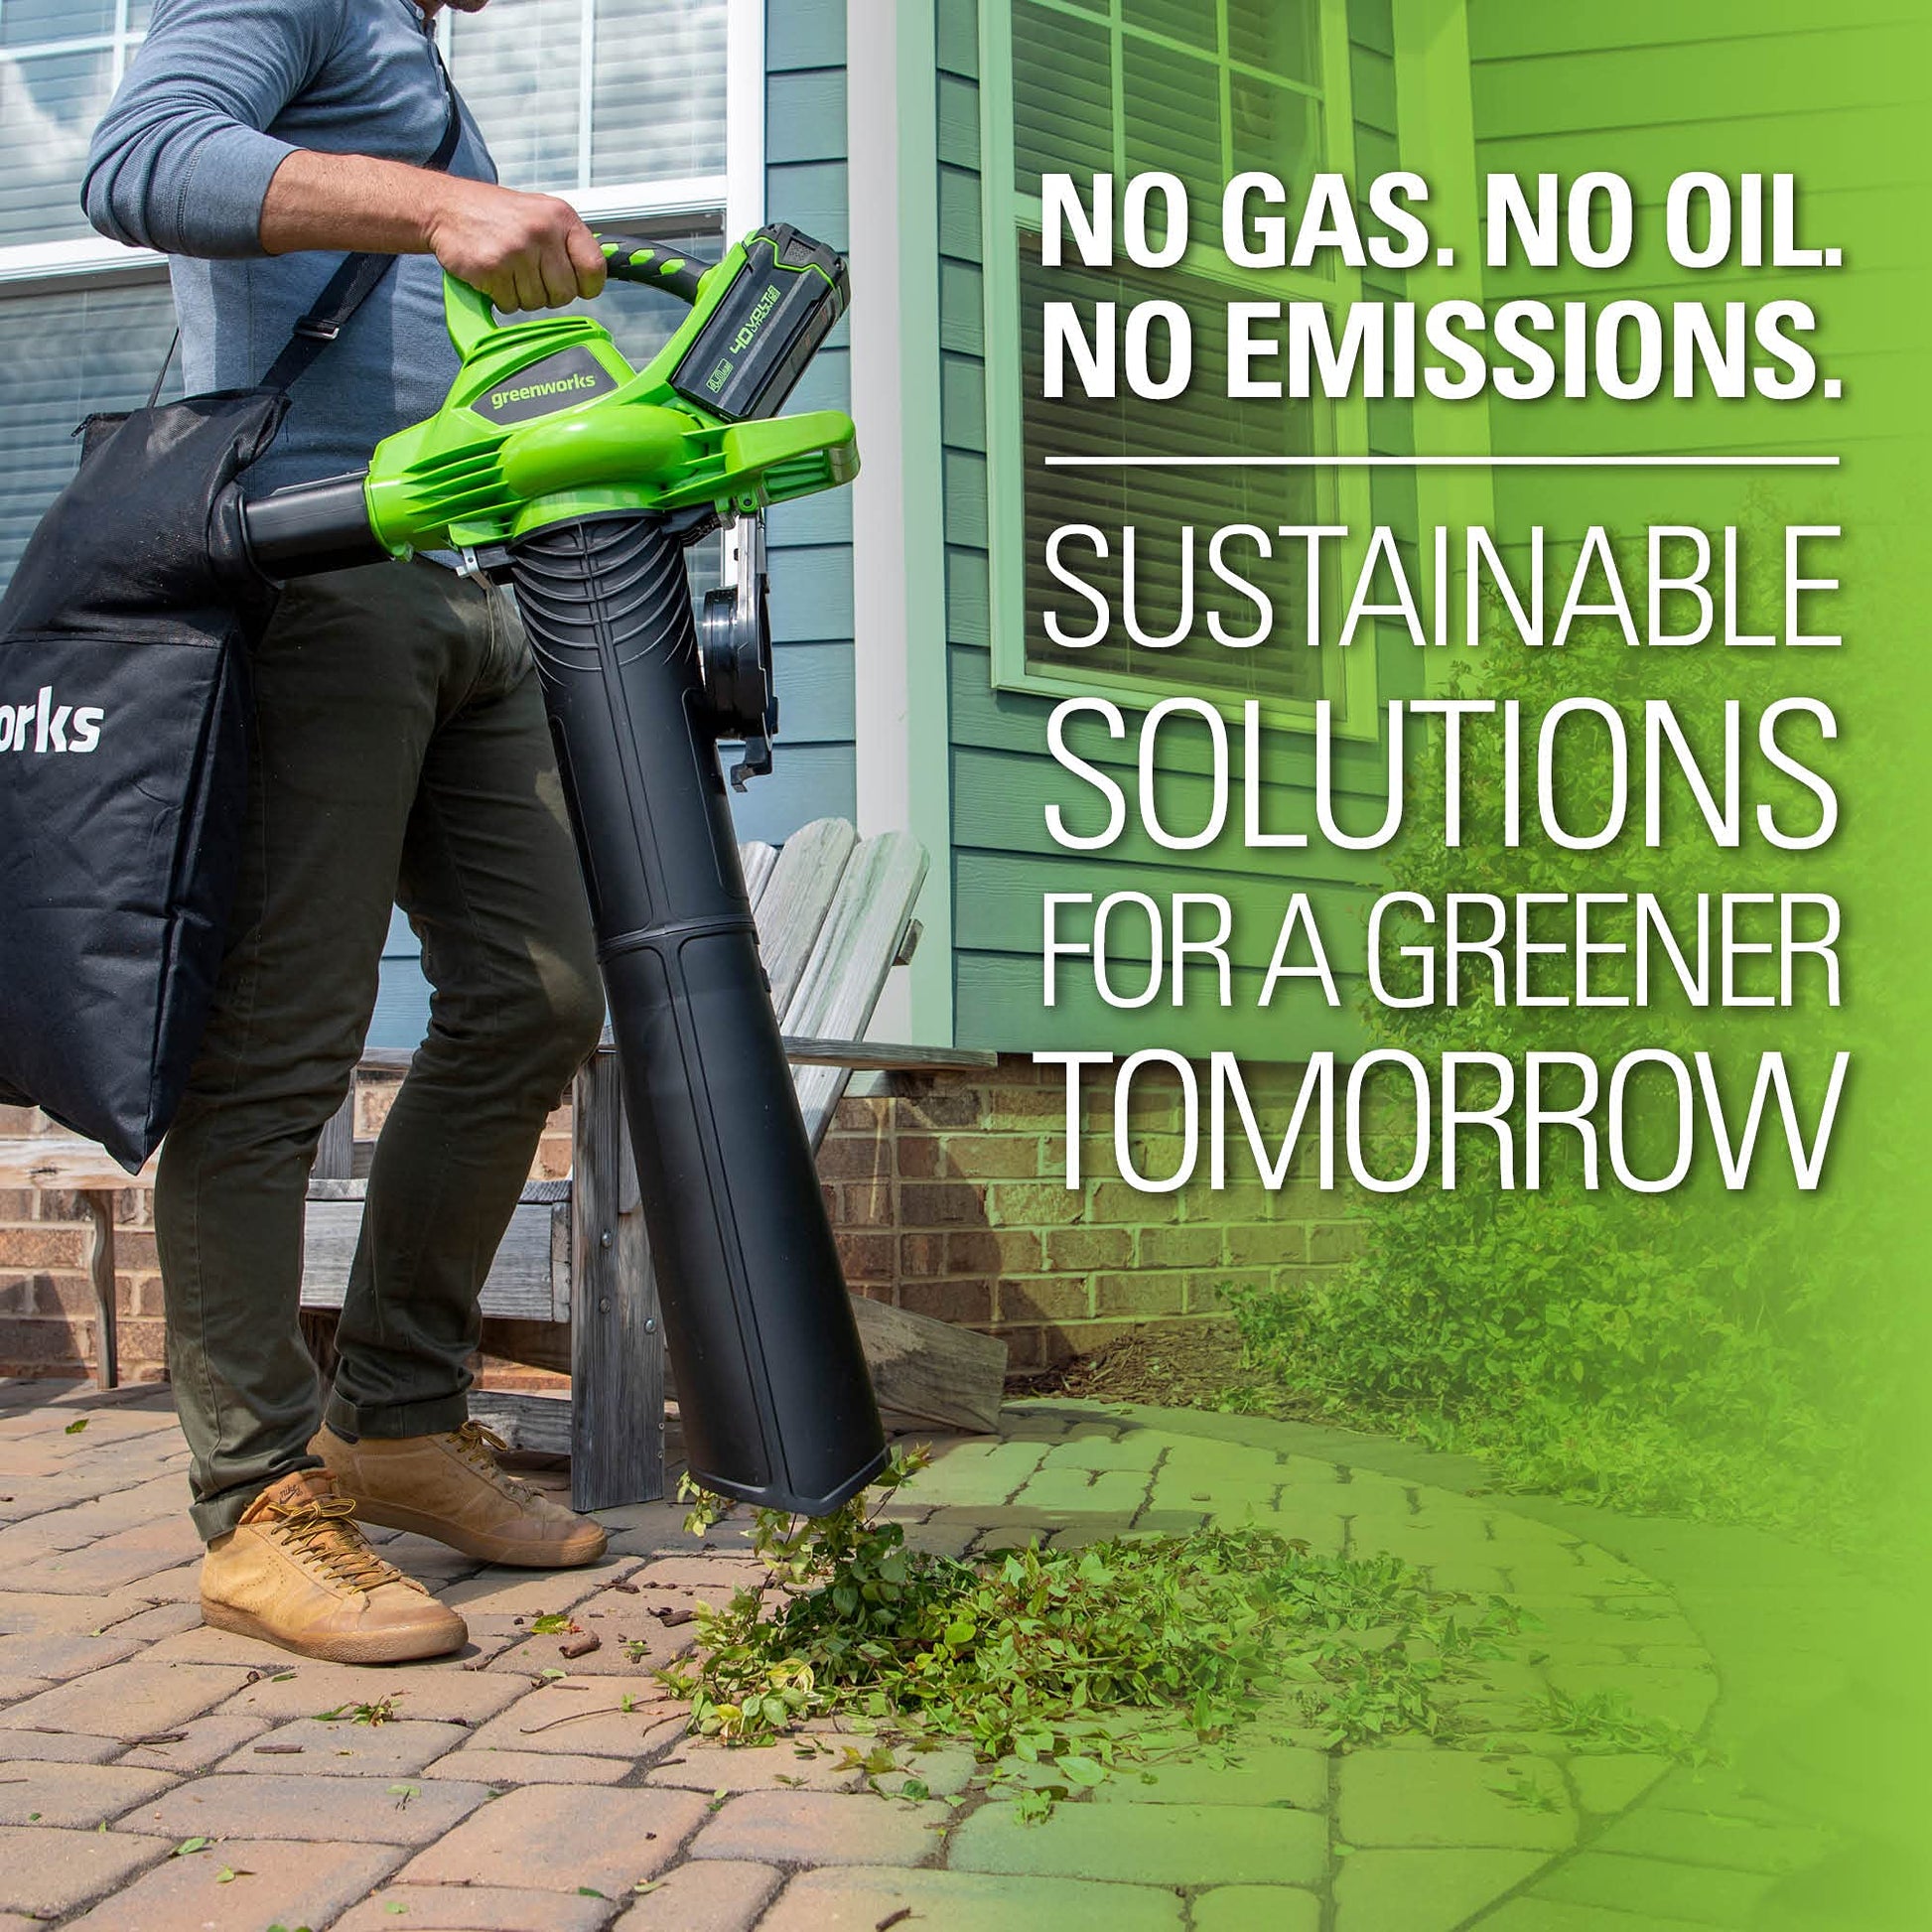 Greenworks 40V (230 MPH / 505 CFM / 75+ Compatible Tools) Cordless Brushless Leaf Blower / Vacuum, Tool Only